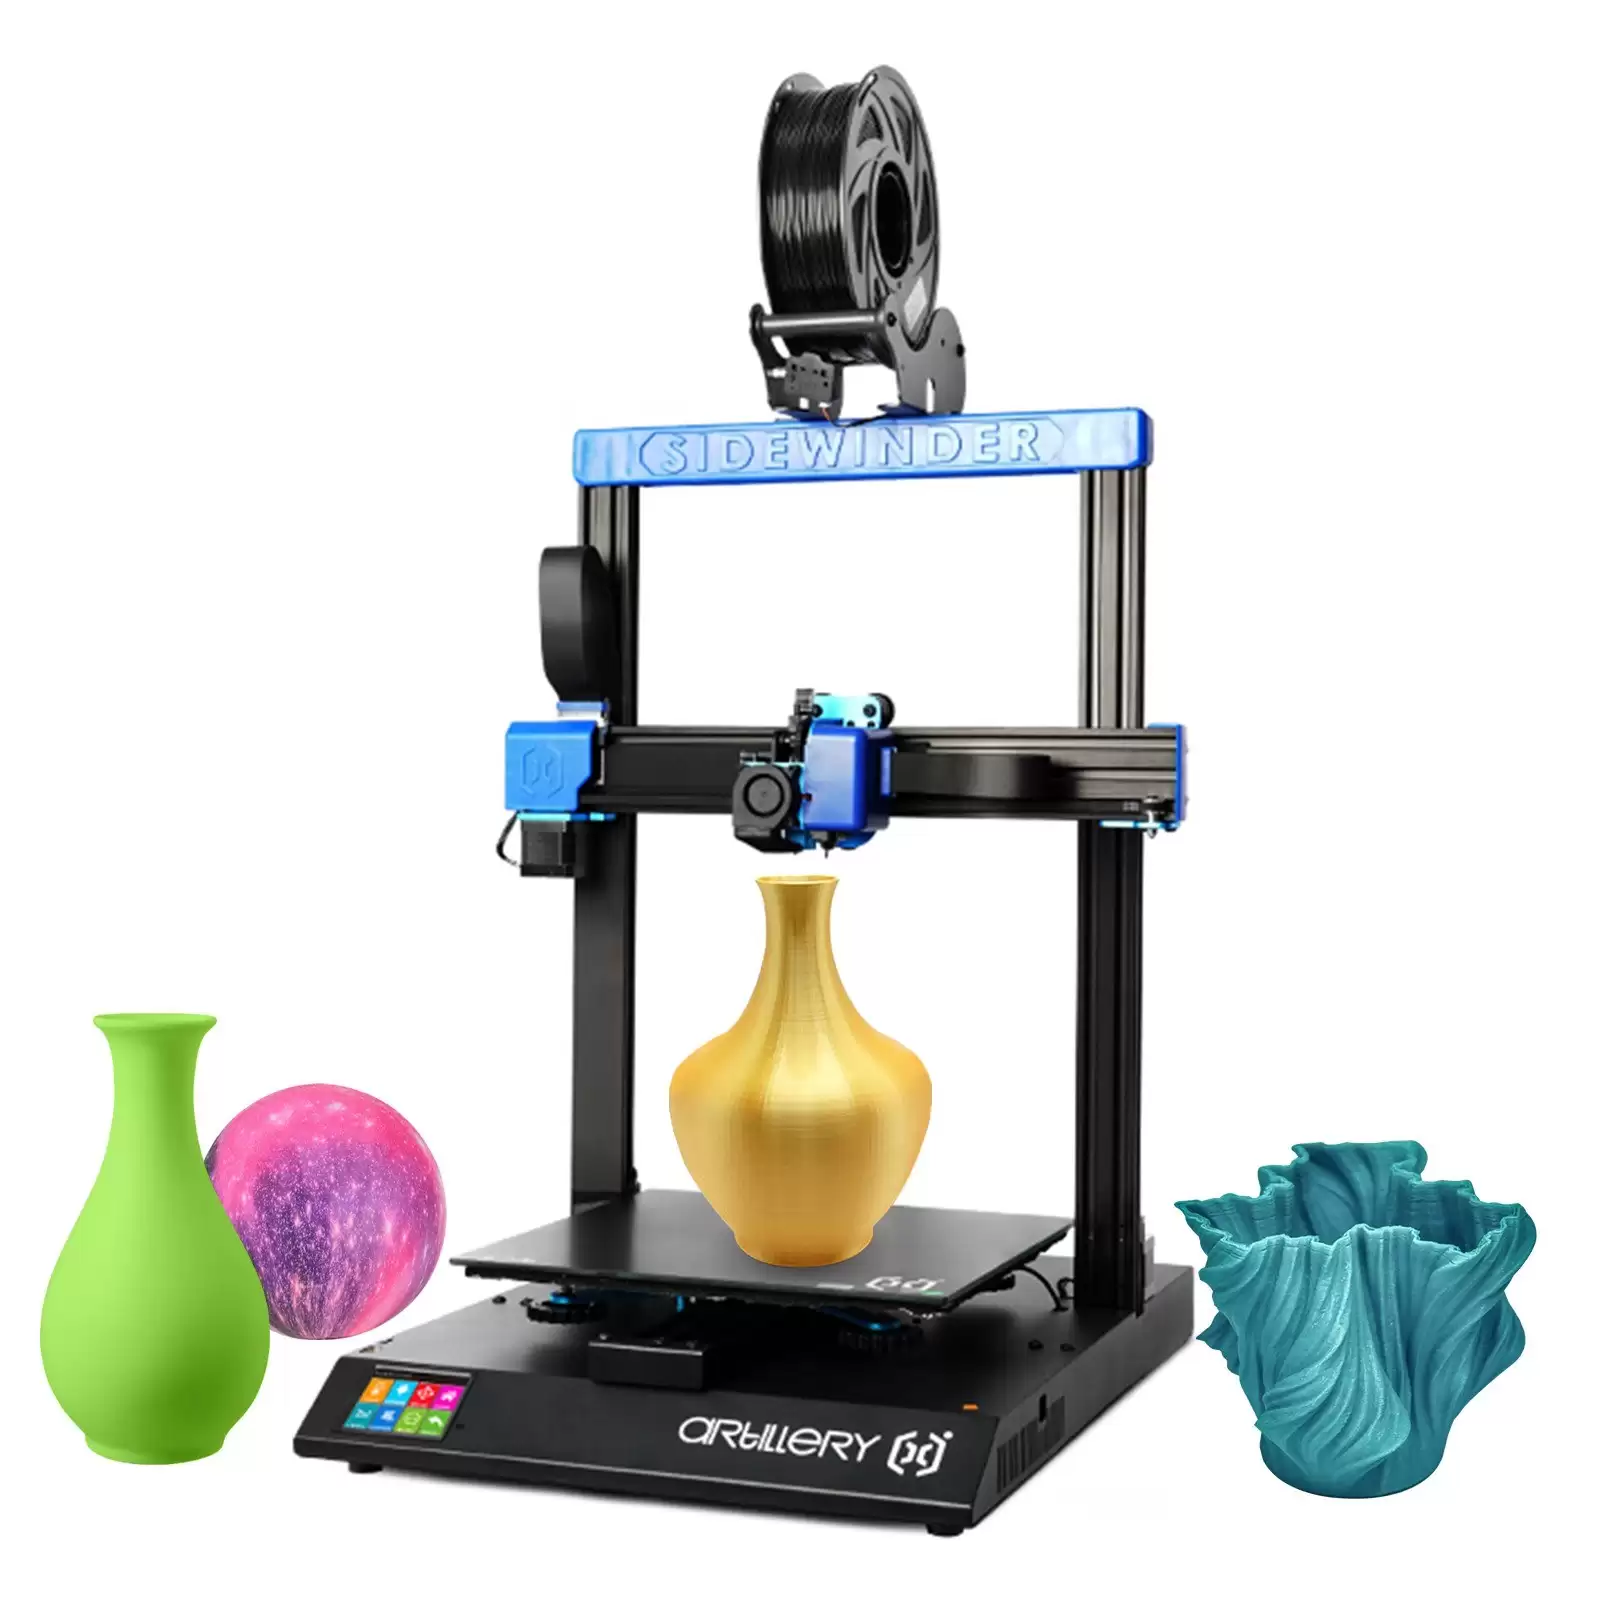 Order In Just $398.84 Artillery Sidewinder-X2 3d Printer 300x300x400mm Printing Size And Free Shipping With This Cafago Discount Voucher